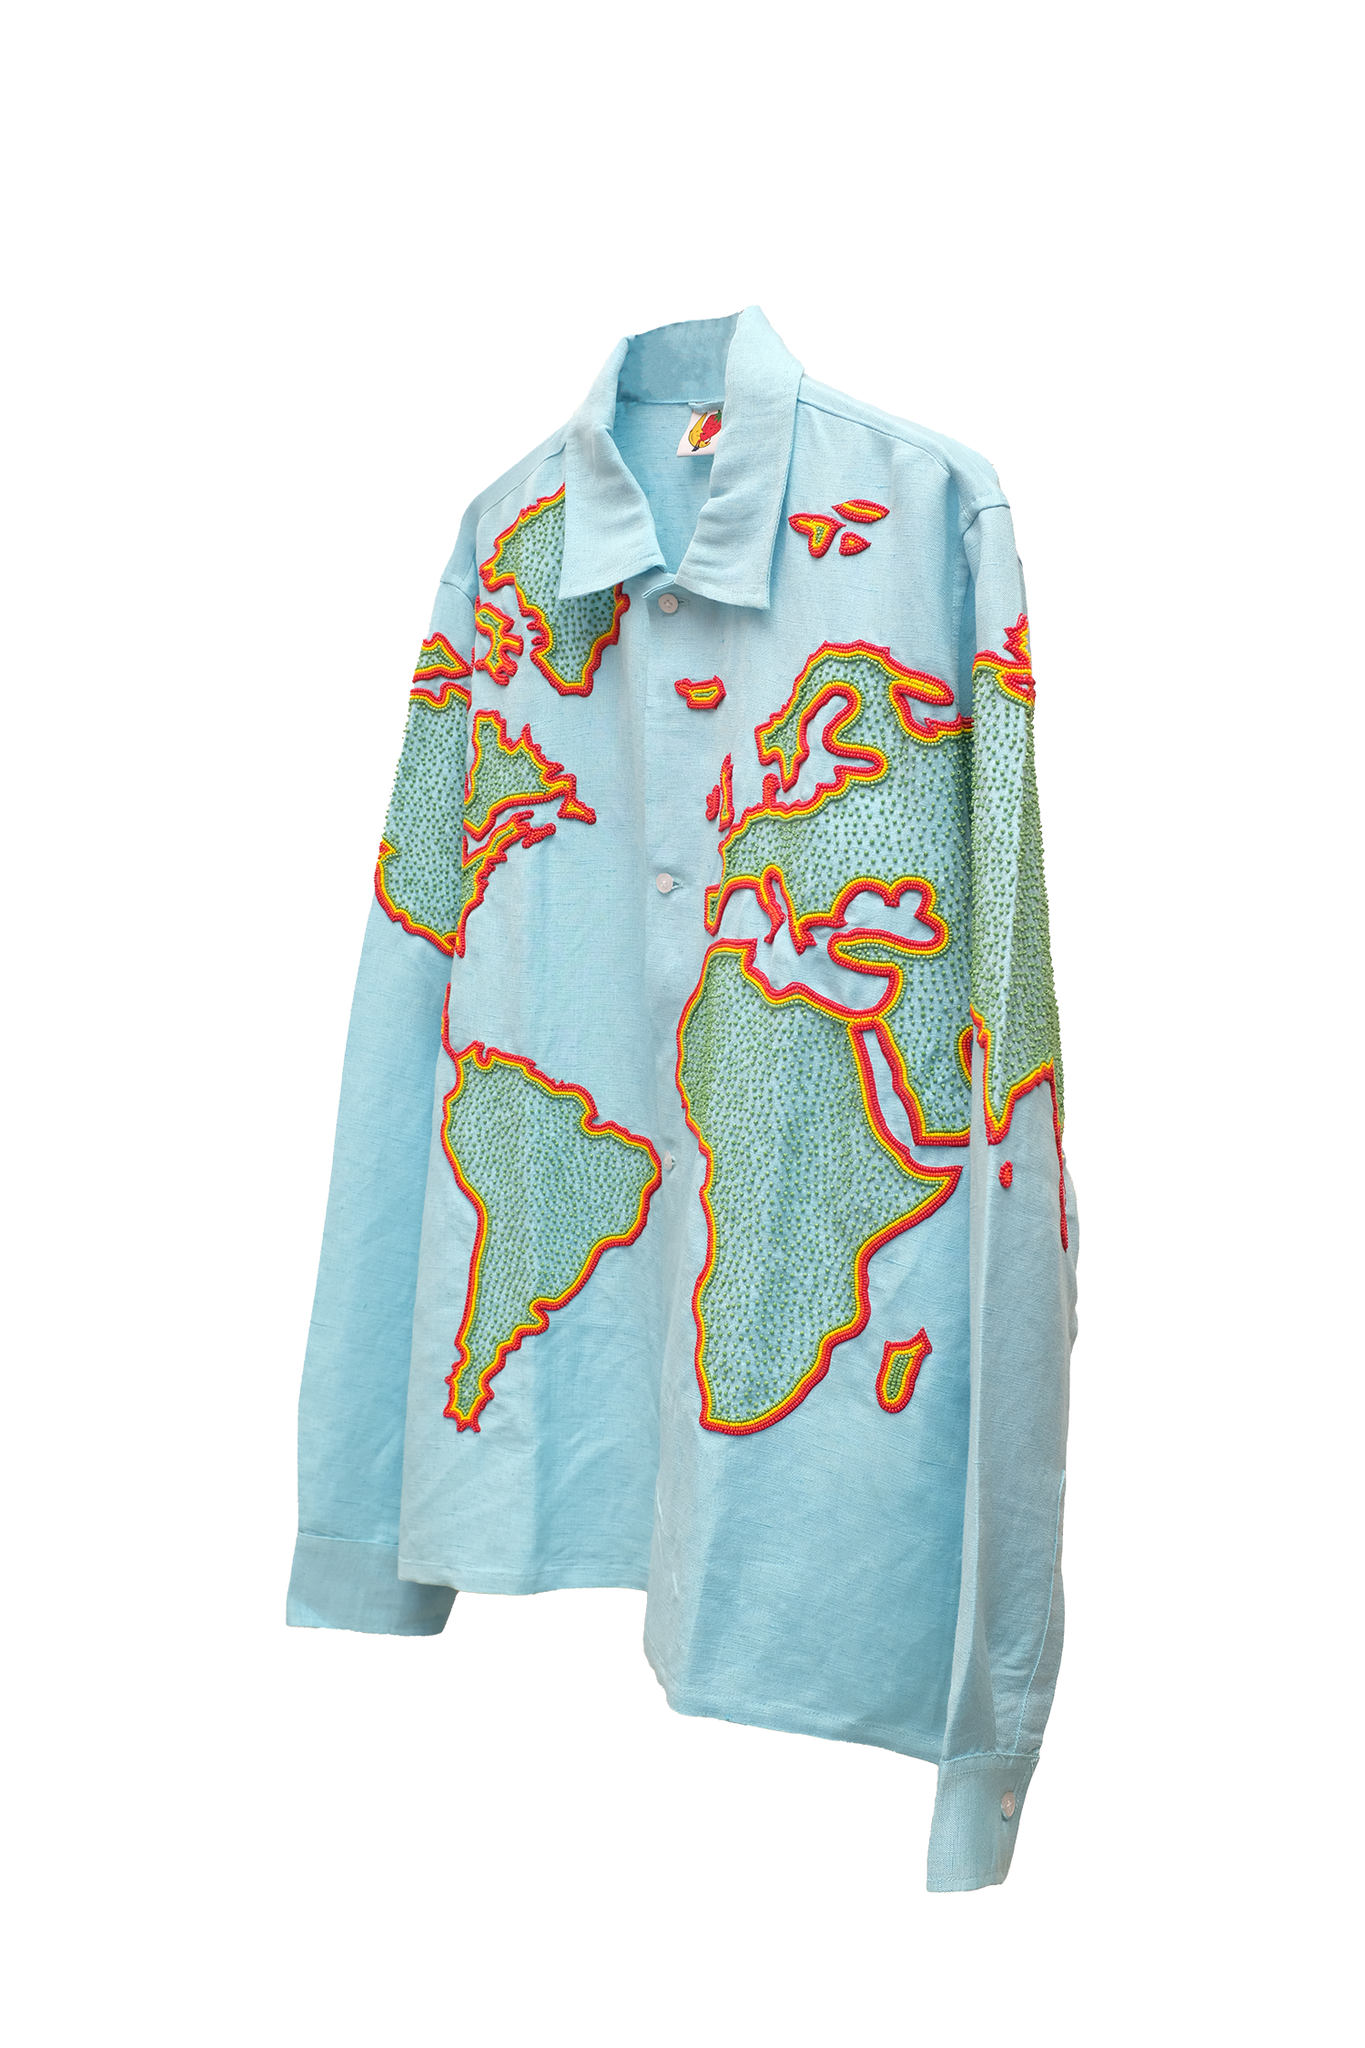 UNISEX WORLD MAP EMBROIDERED SHIRT WOVEN